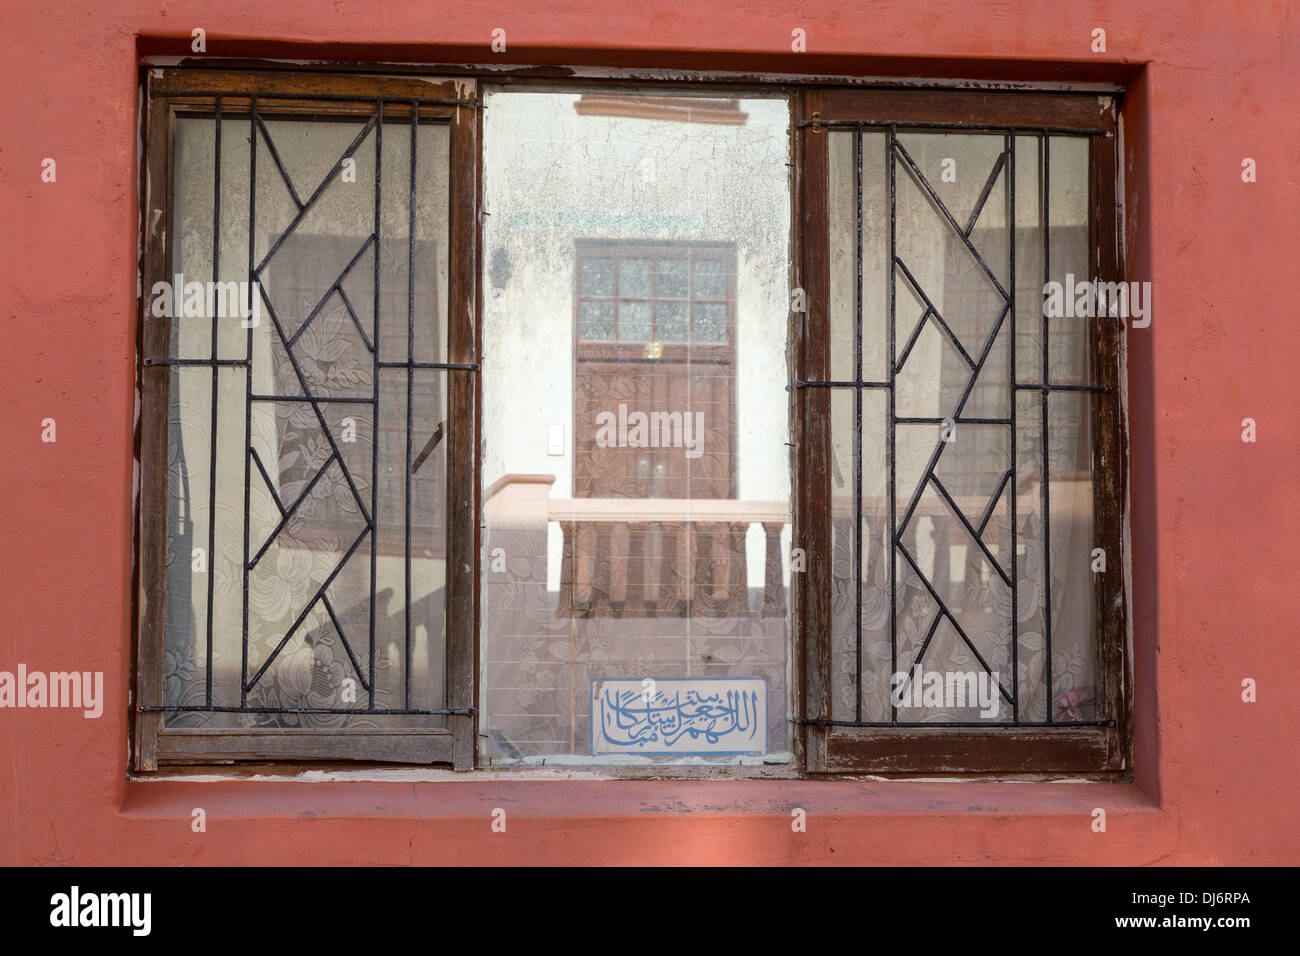 South Africa, Cape Town, Bo-kaap. Reflection in Window, Arabic Inscription at Bottom. Stock Photo